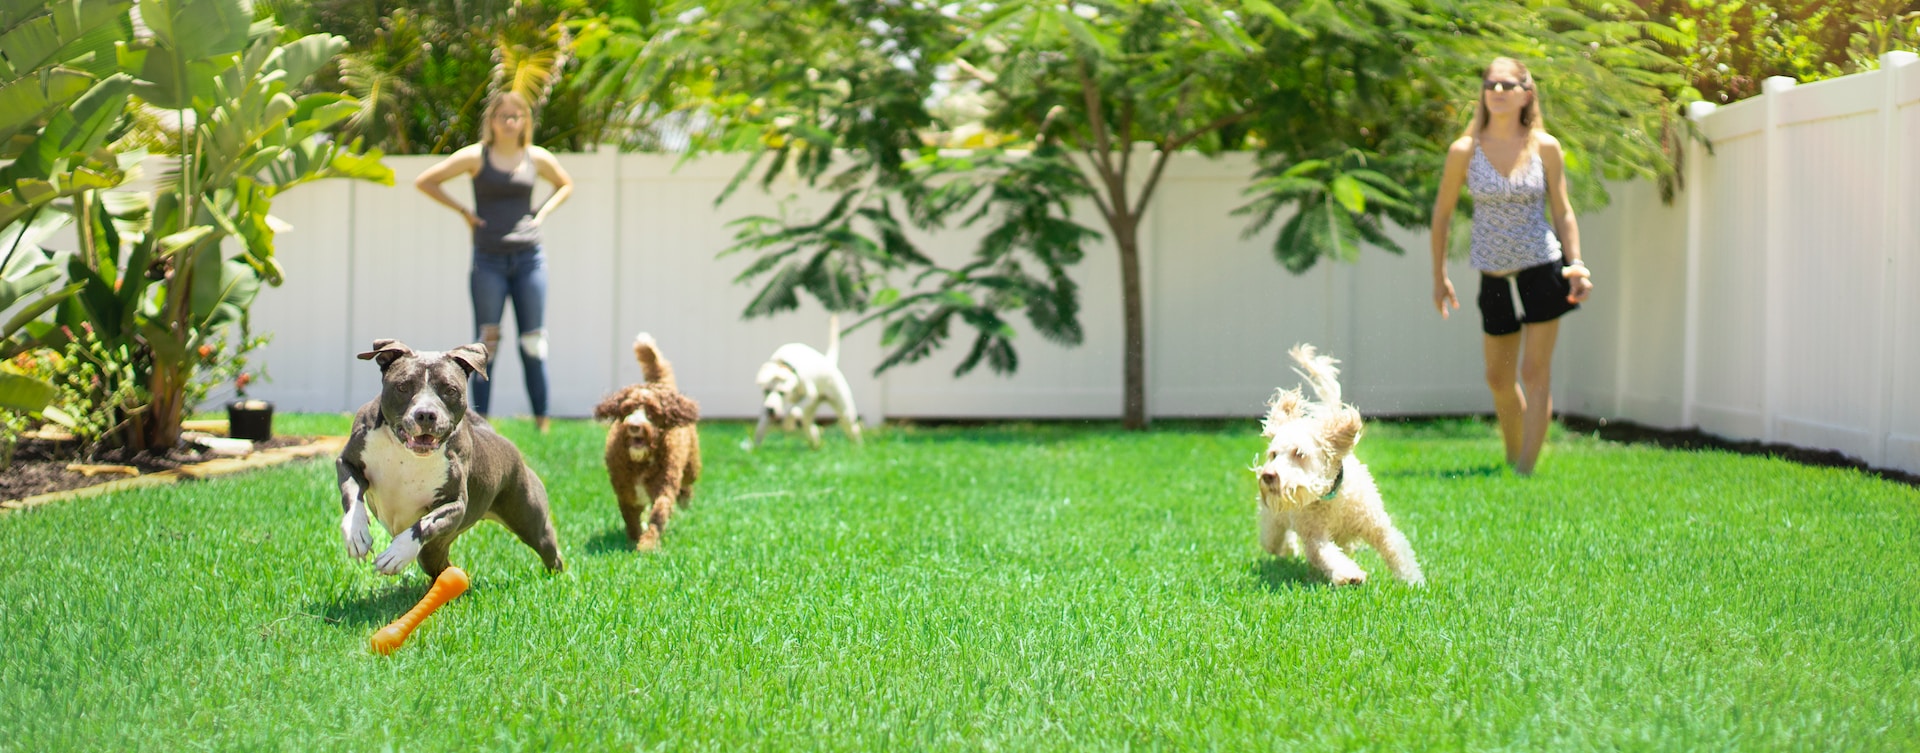 white and brown dogs on green grass field during daytime